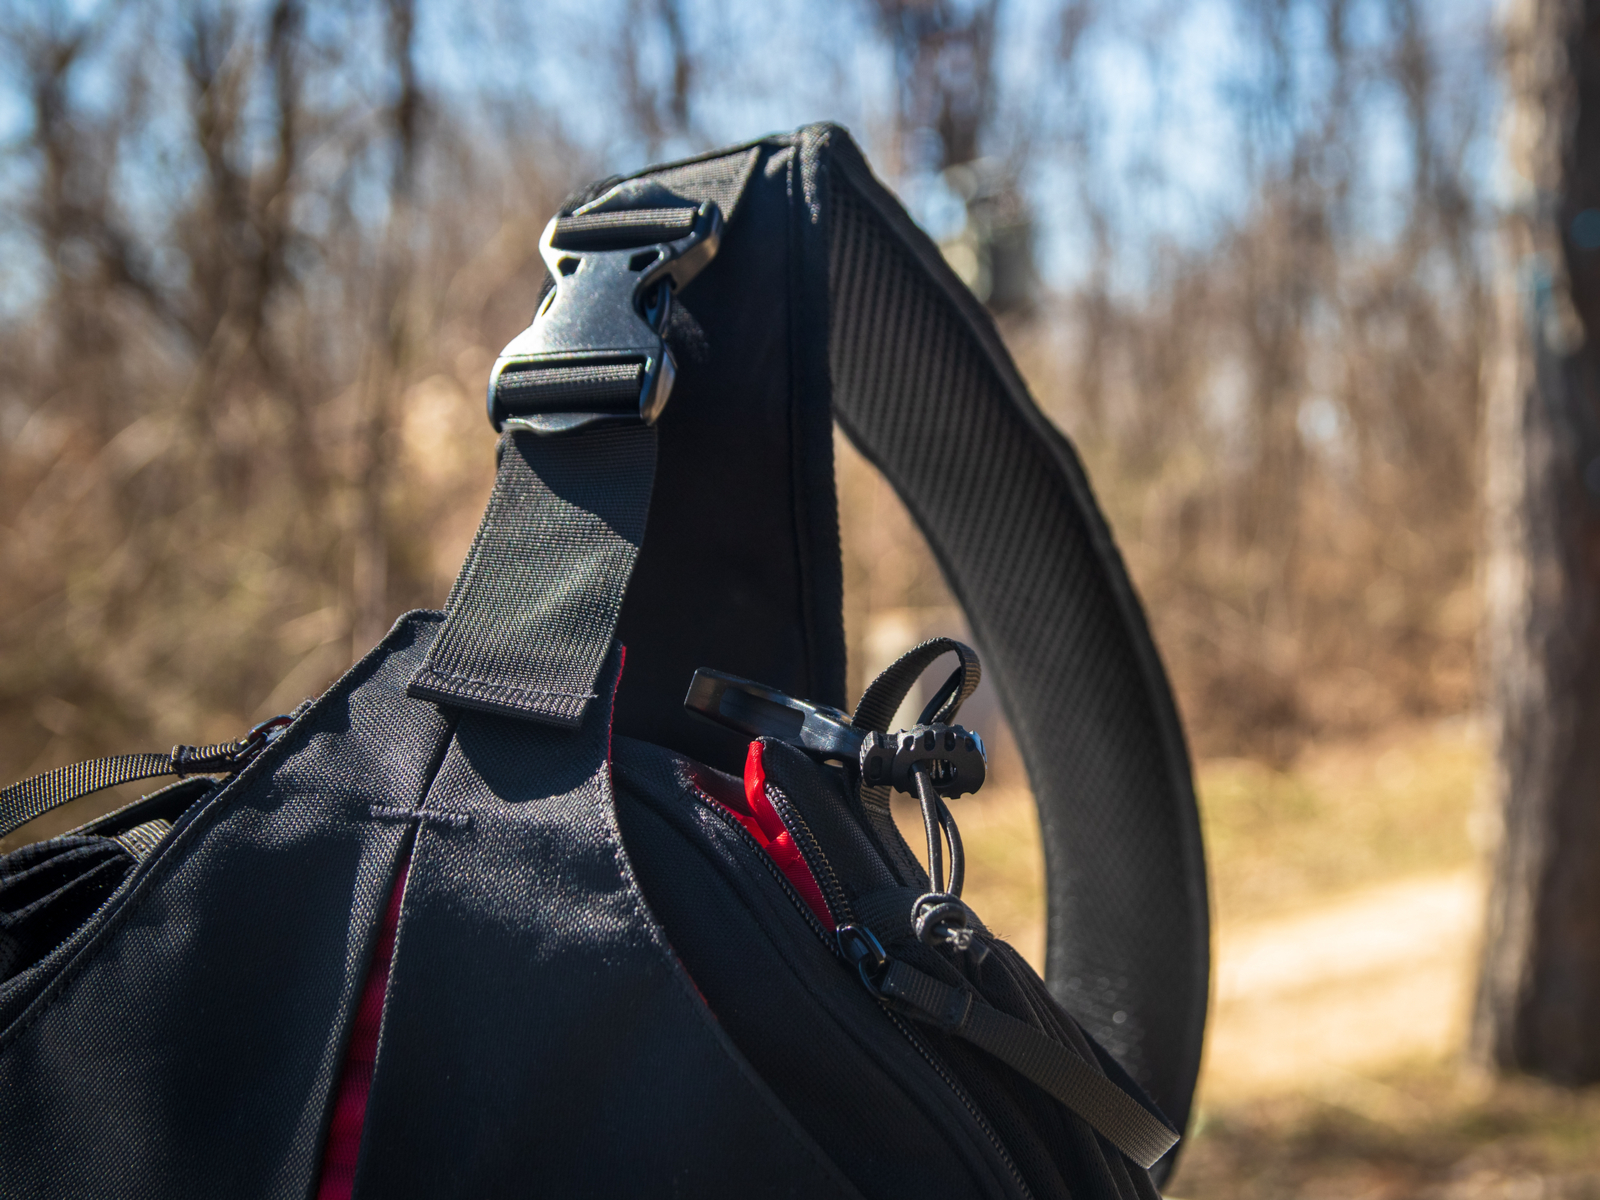 Sling bag (also called one of the best EDC bags) pictured on the ground in a park next to a tree with a blurry background